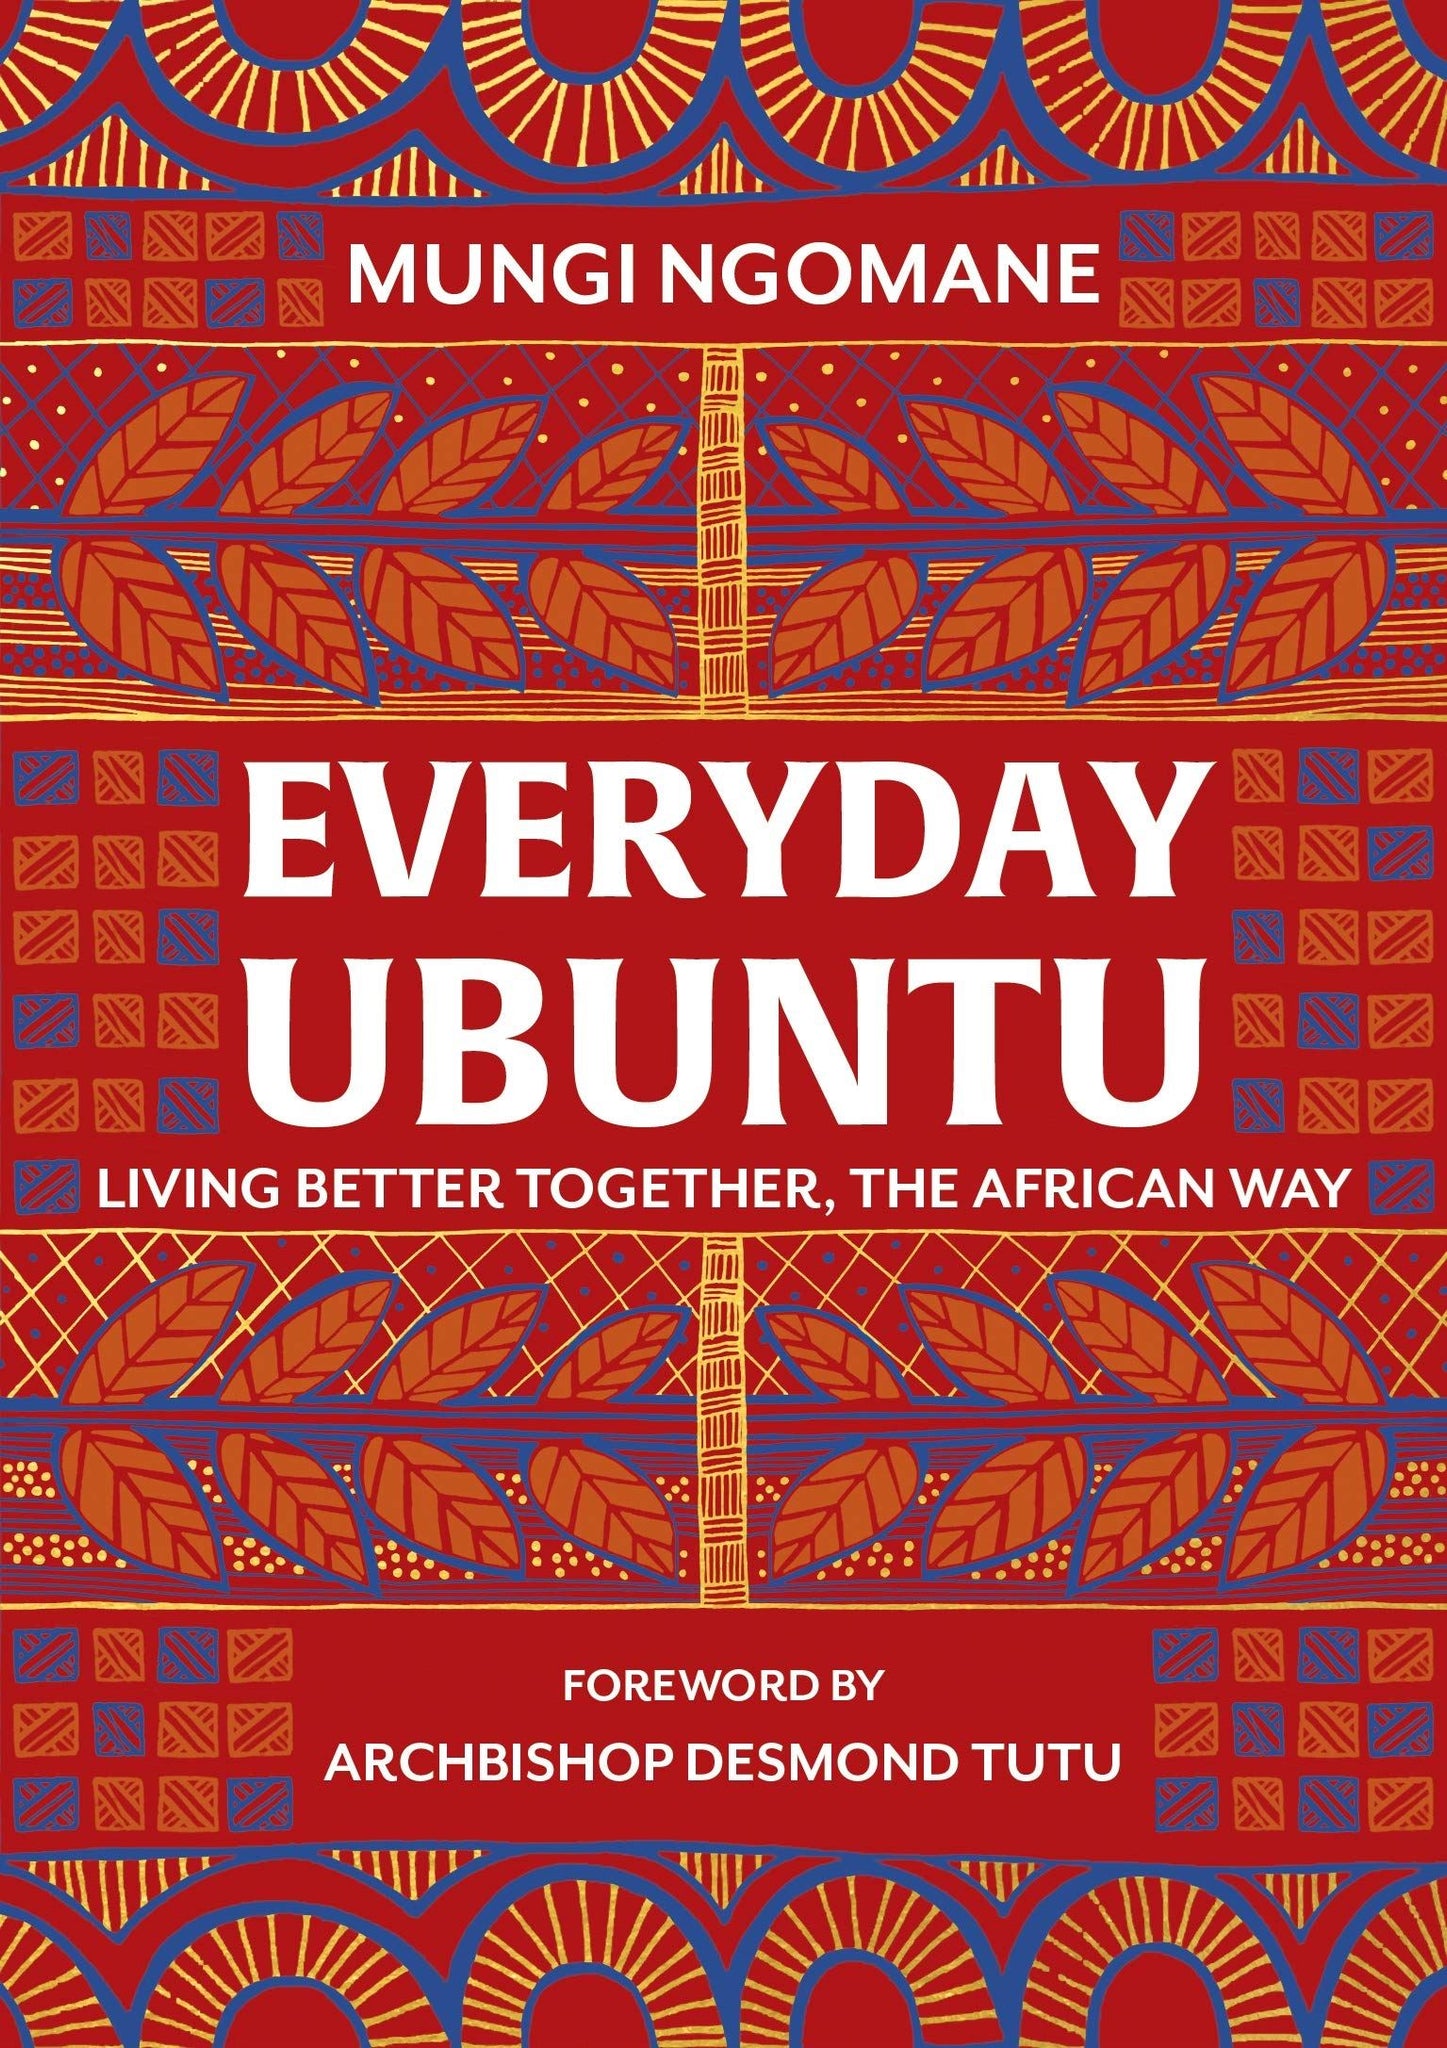 Everyday Ubuntu: Living Better Together The African Way